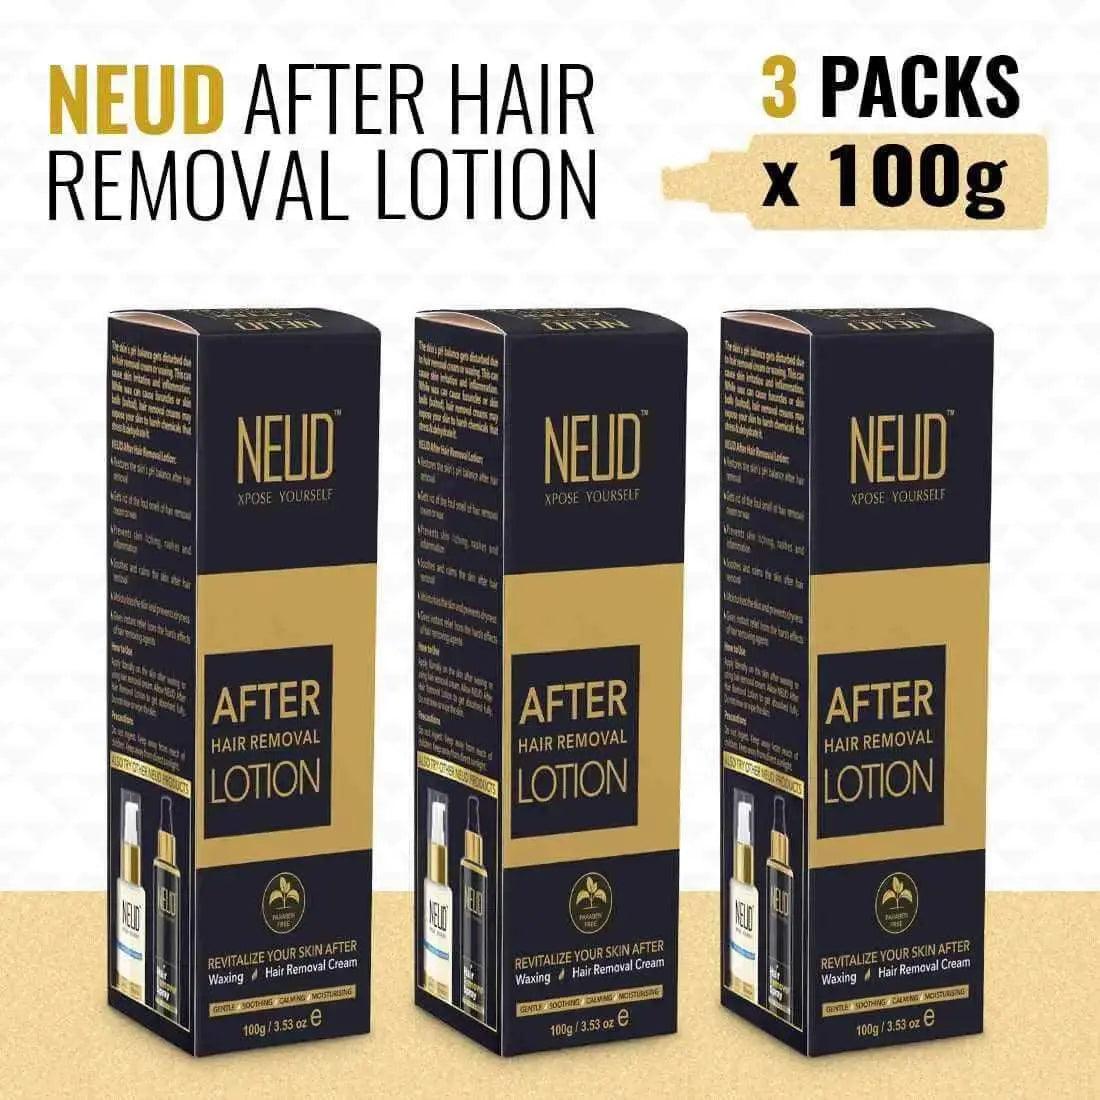 NEUD After-Hair-Removal Lotion for Skin Care in Men & Women - 100g